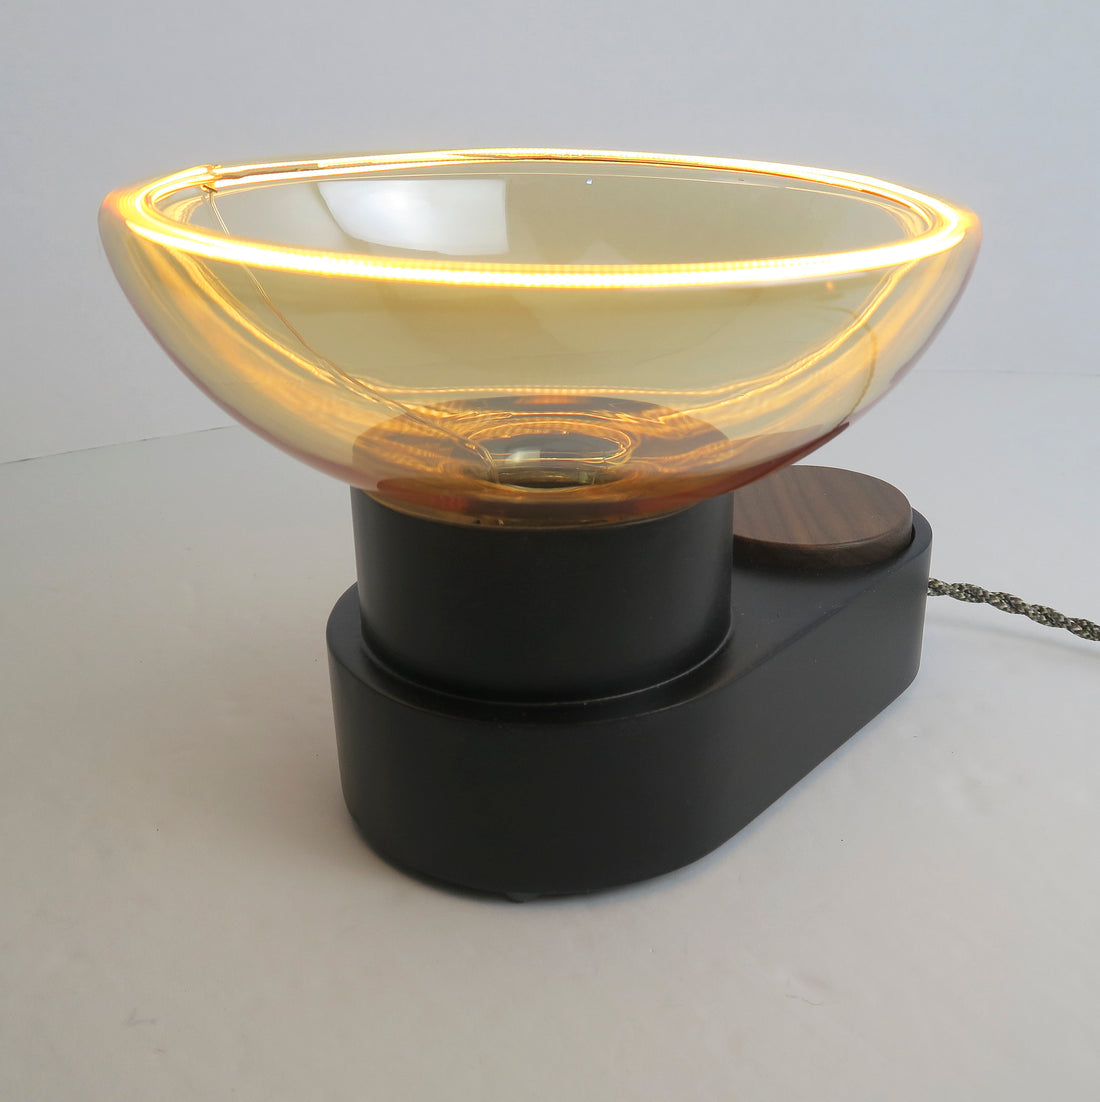 LED modern Lamp  Oval - wood lamp with dimmer - European look lighting - unique light - original Lighting - Unique LED Bulb - Choice of Knob